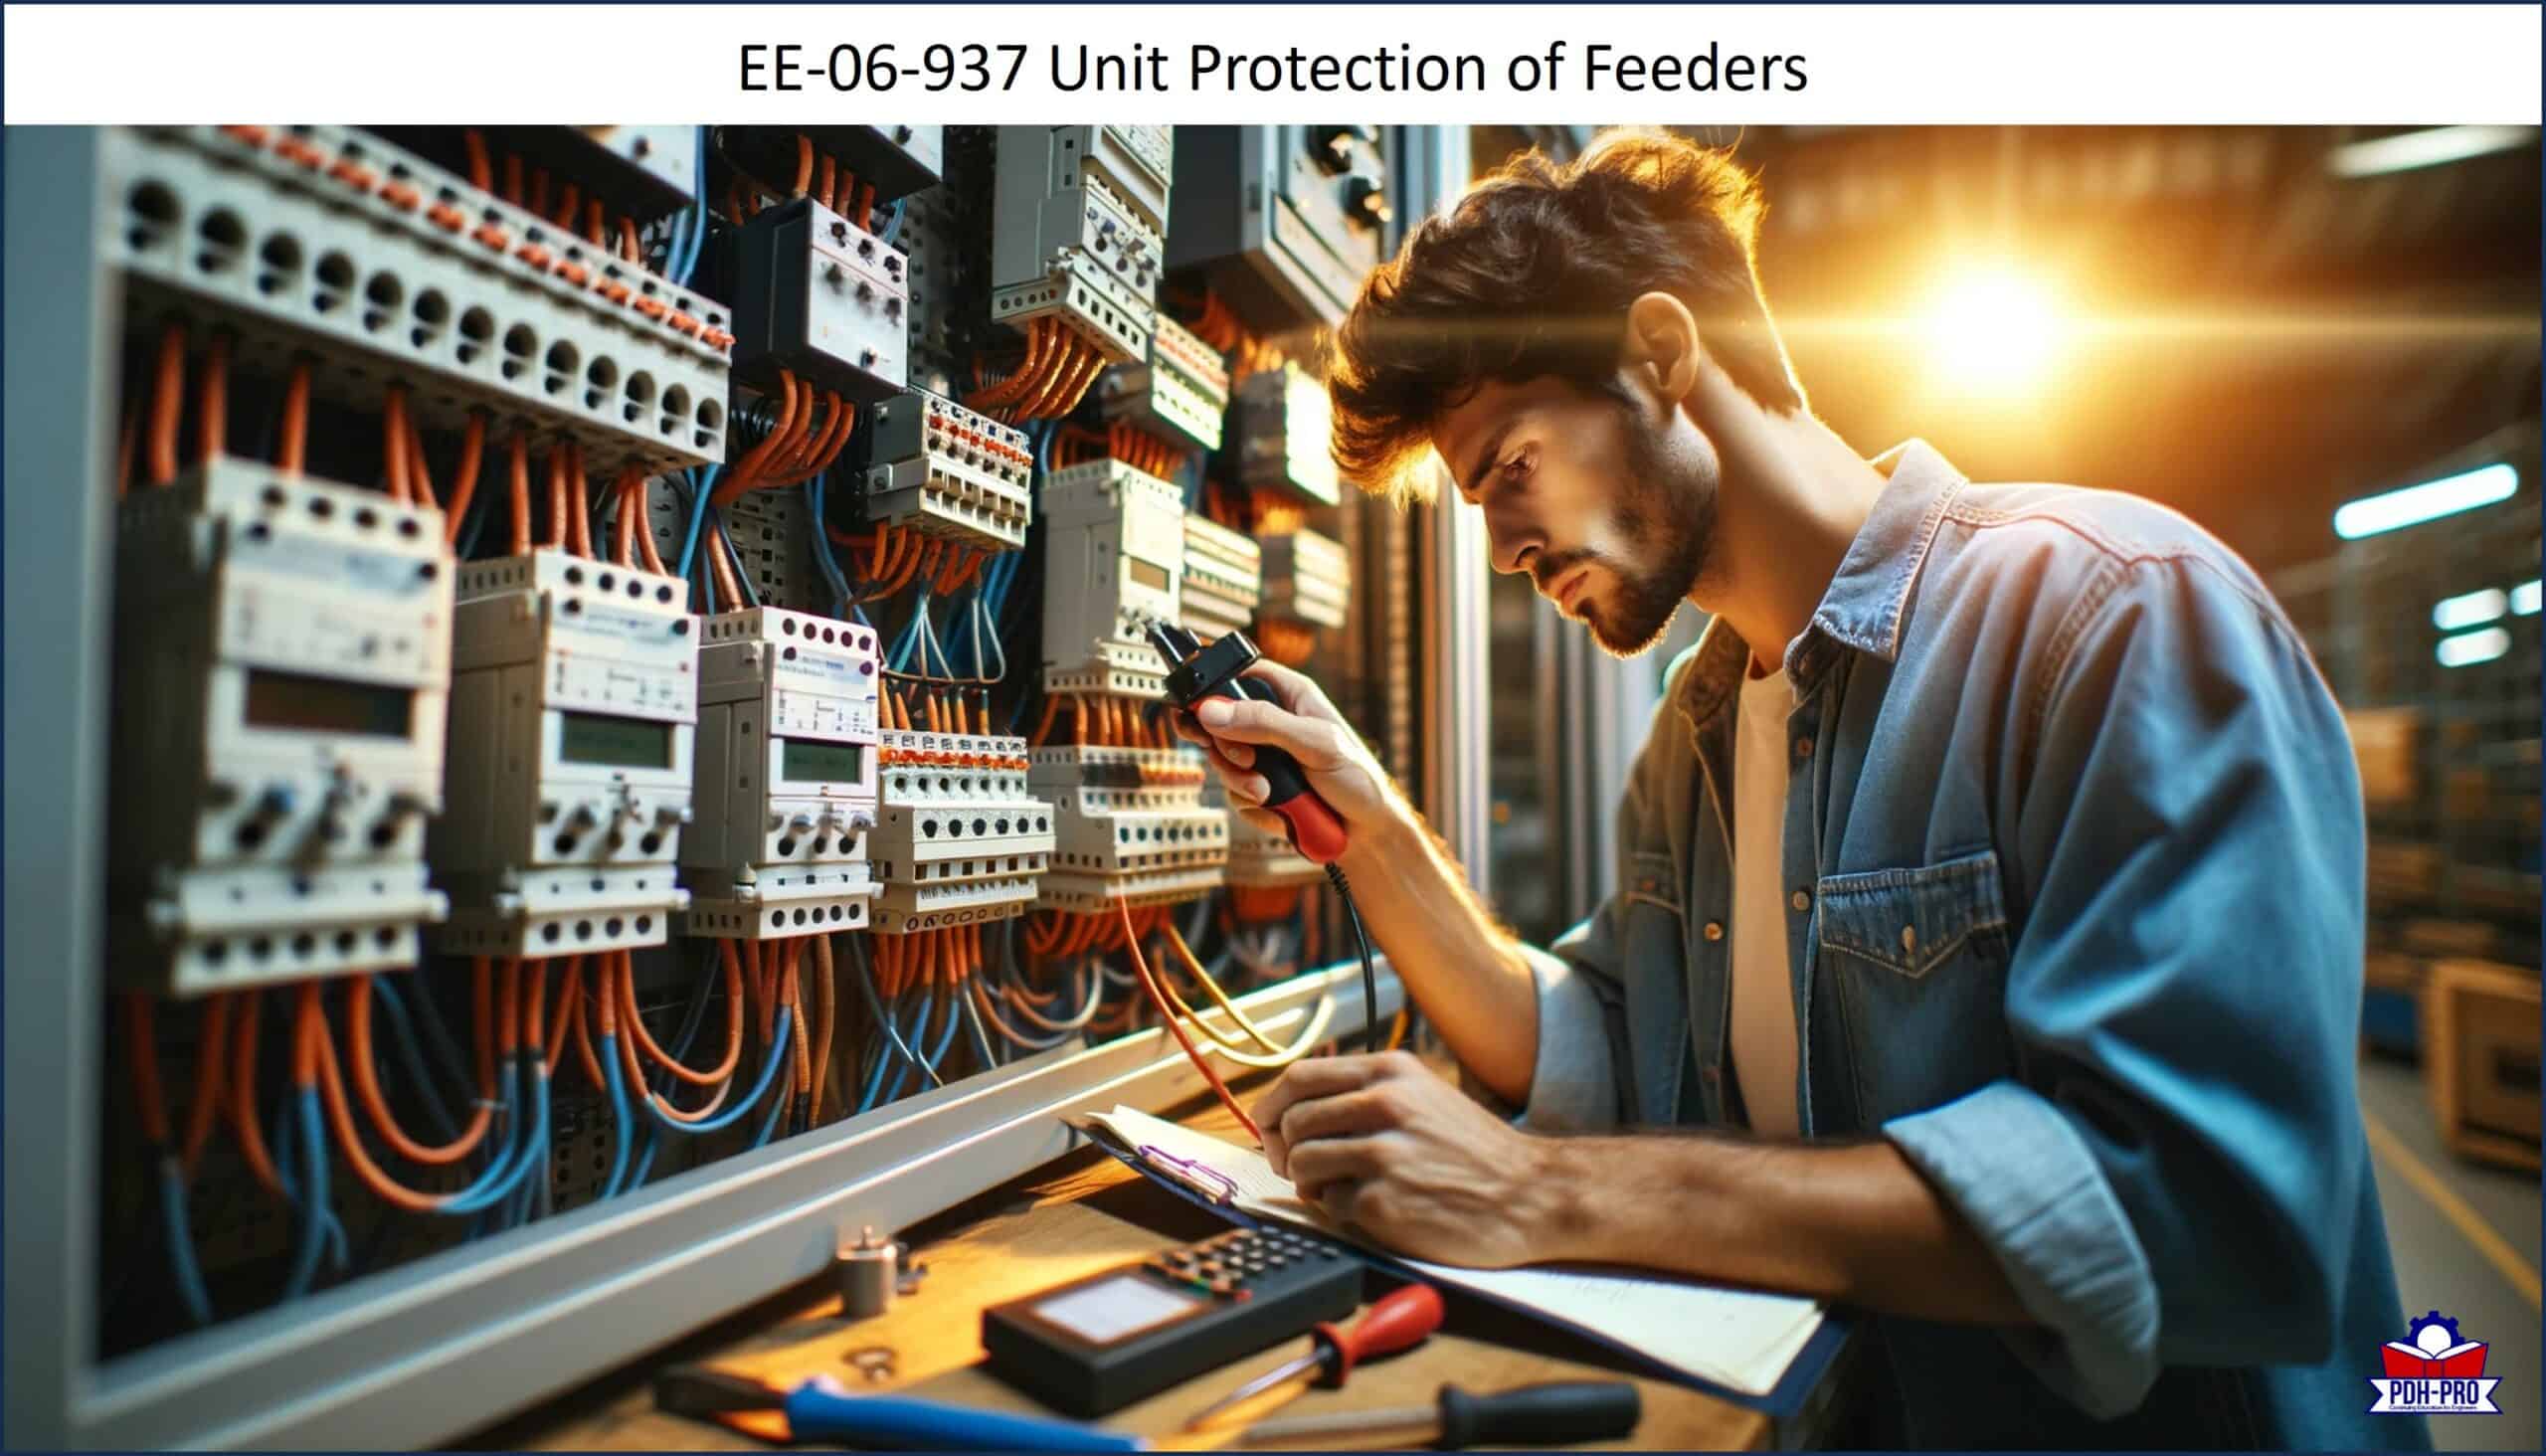 Unit Protection of Feeders